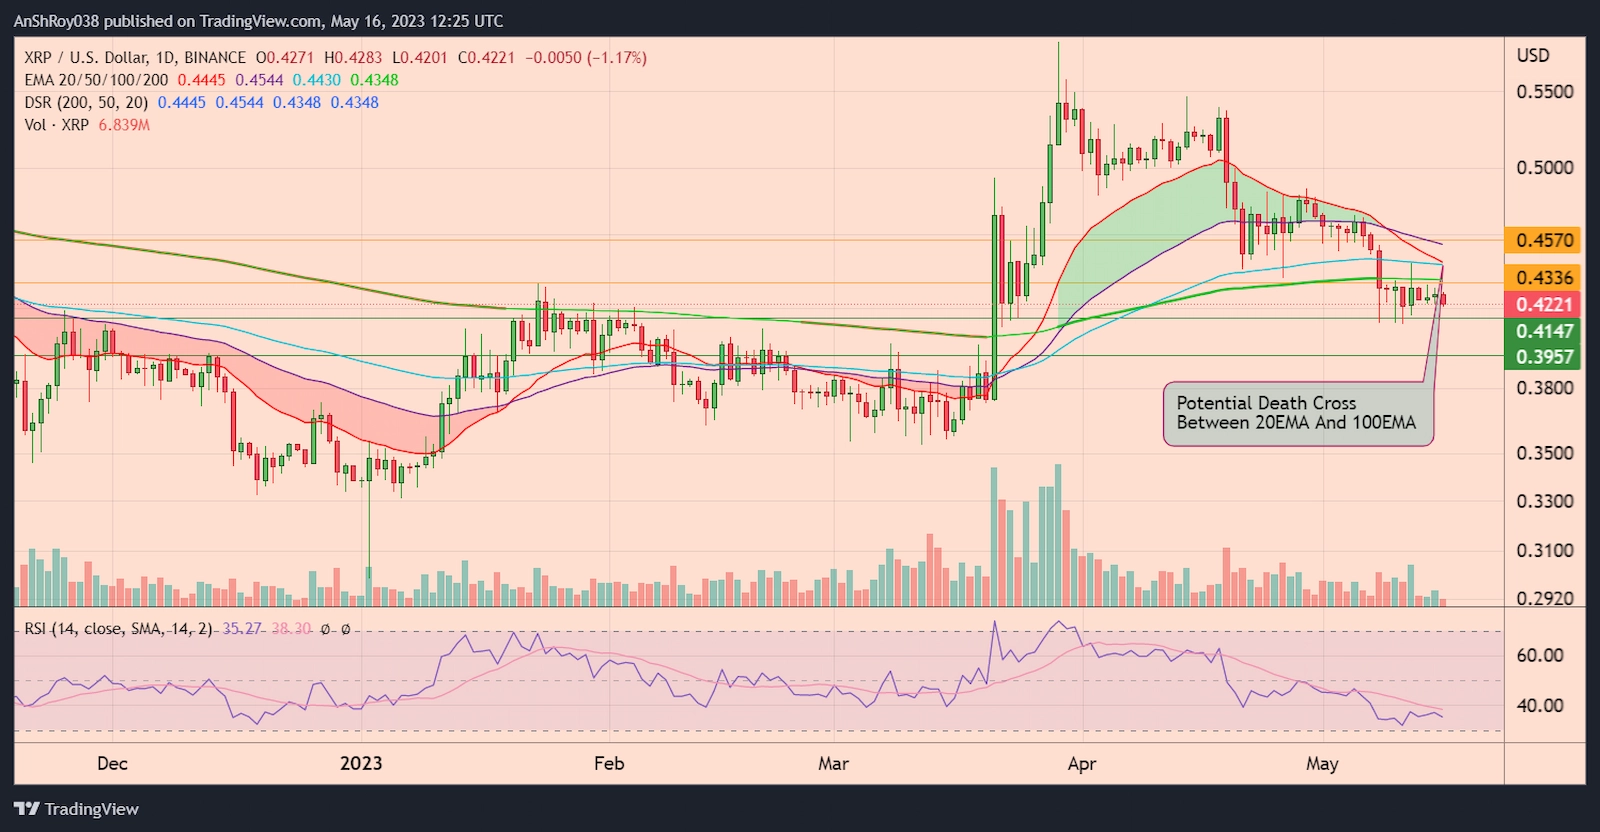 XRPUSD daily chart with RSI and a potential death cross